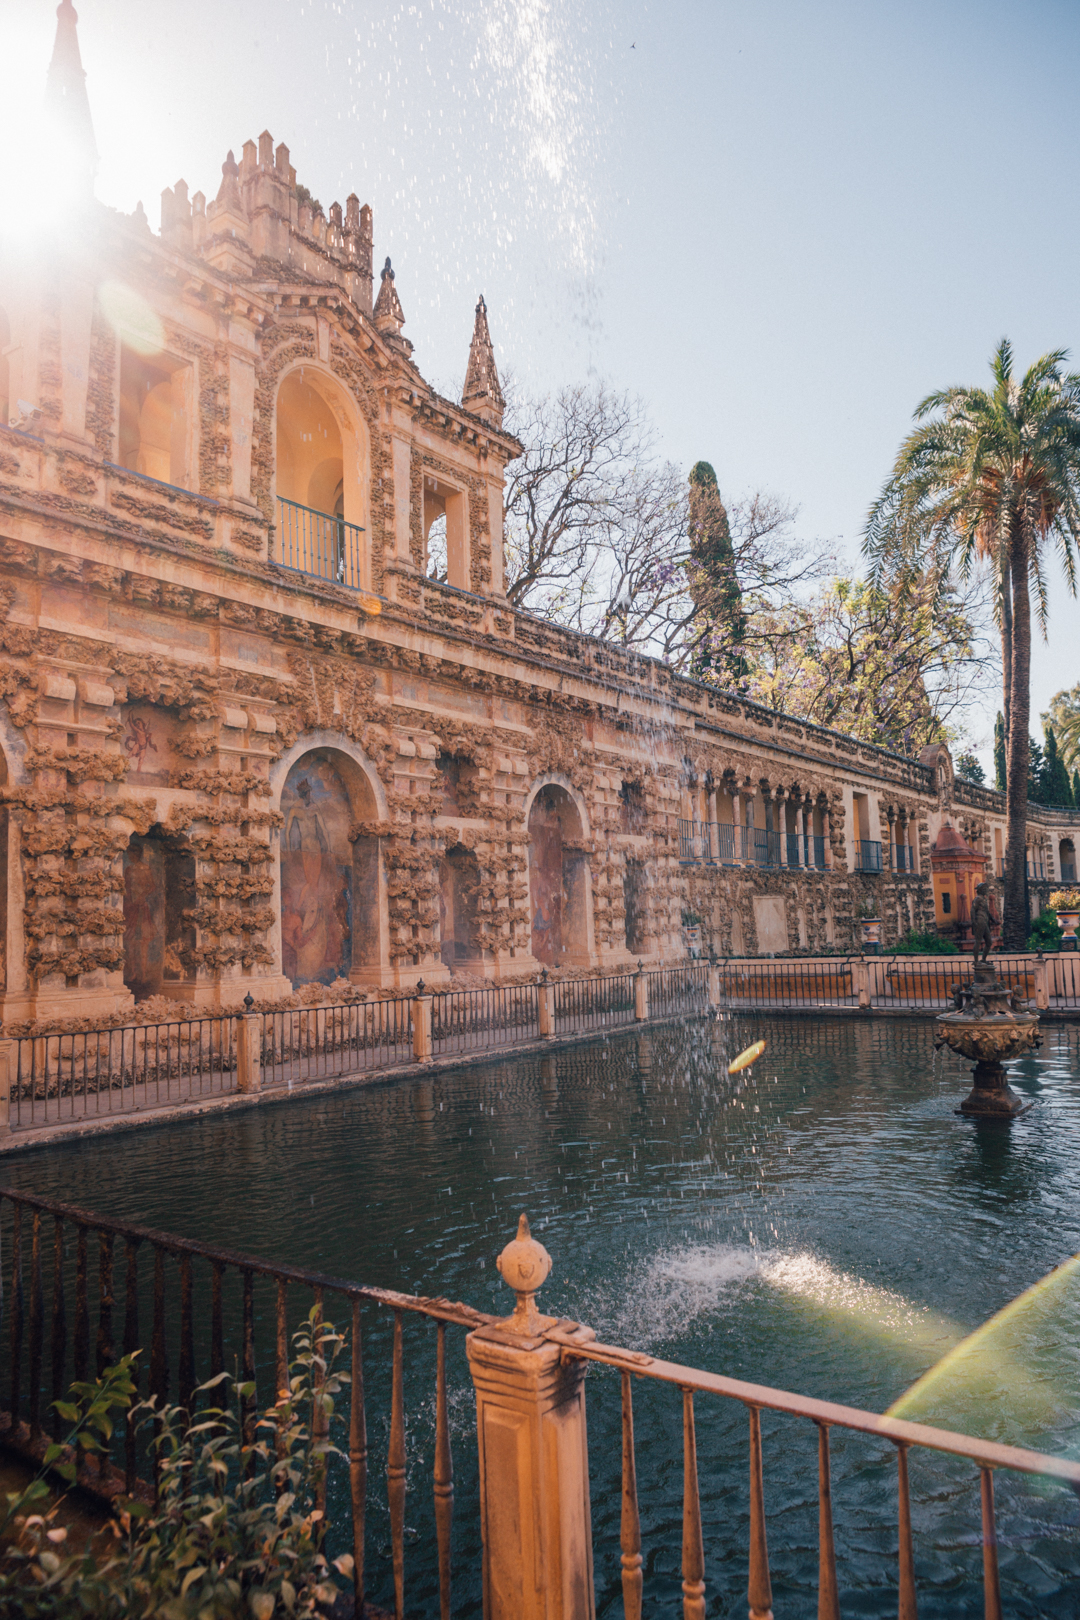 The Real Alcazar of Seville